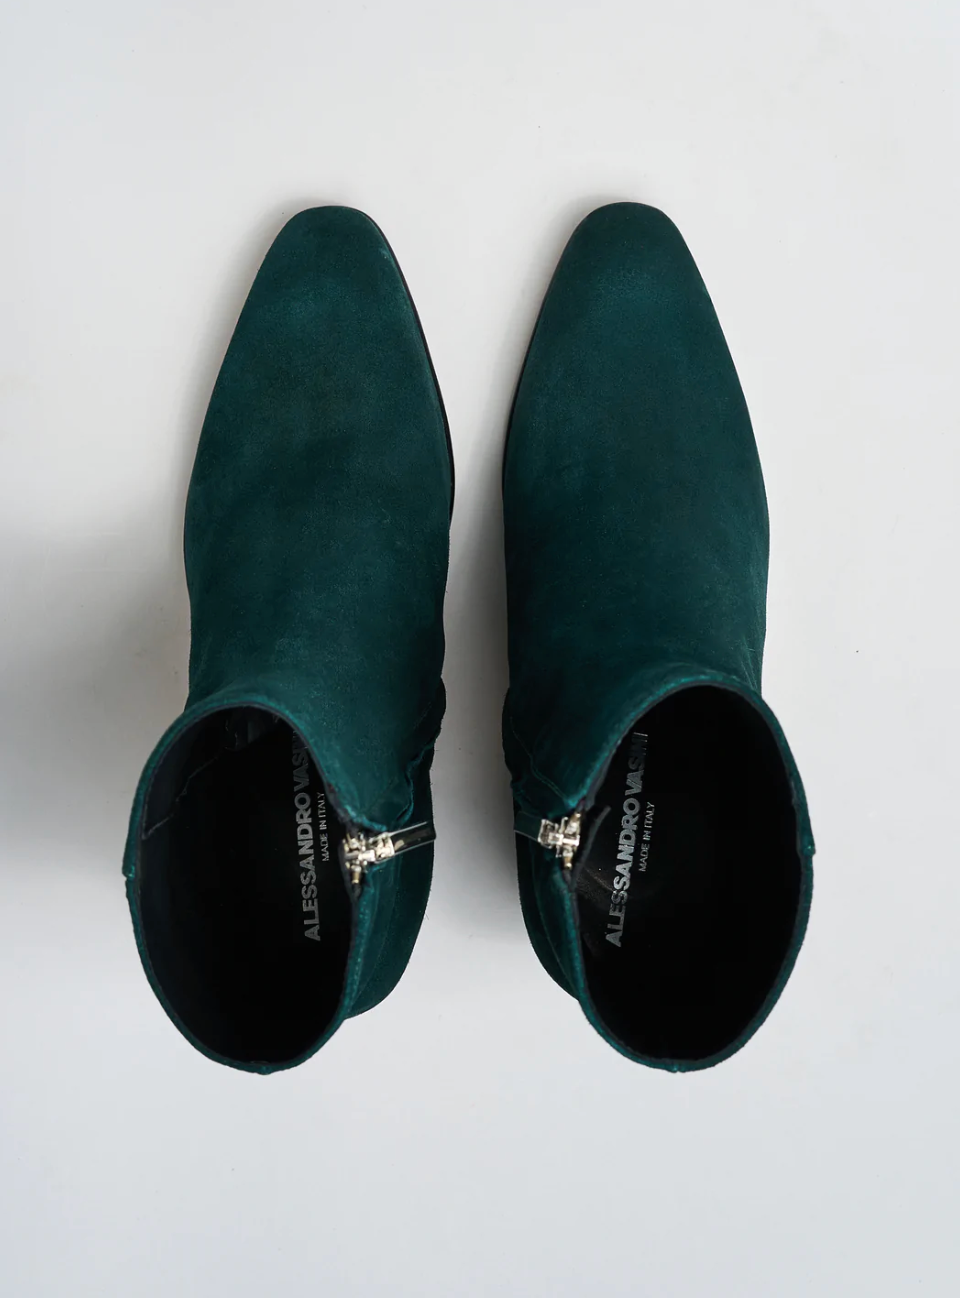 JANIS ANKLE BOOTS 80MM SUEDE